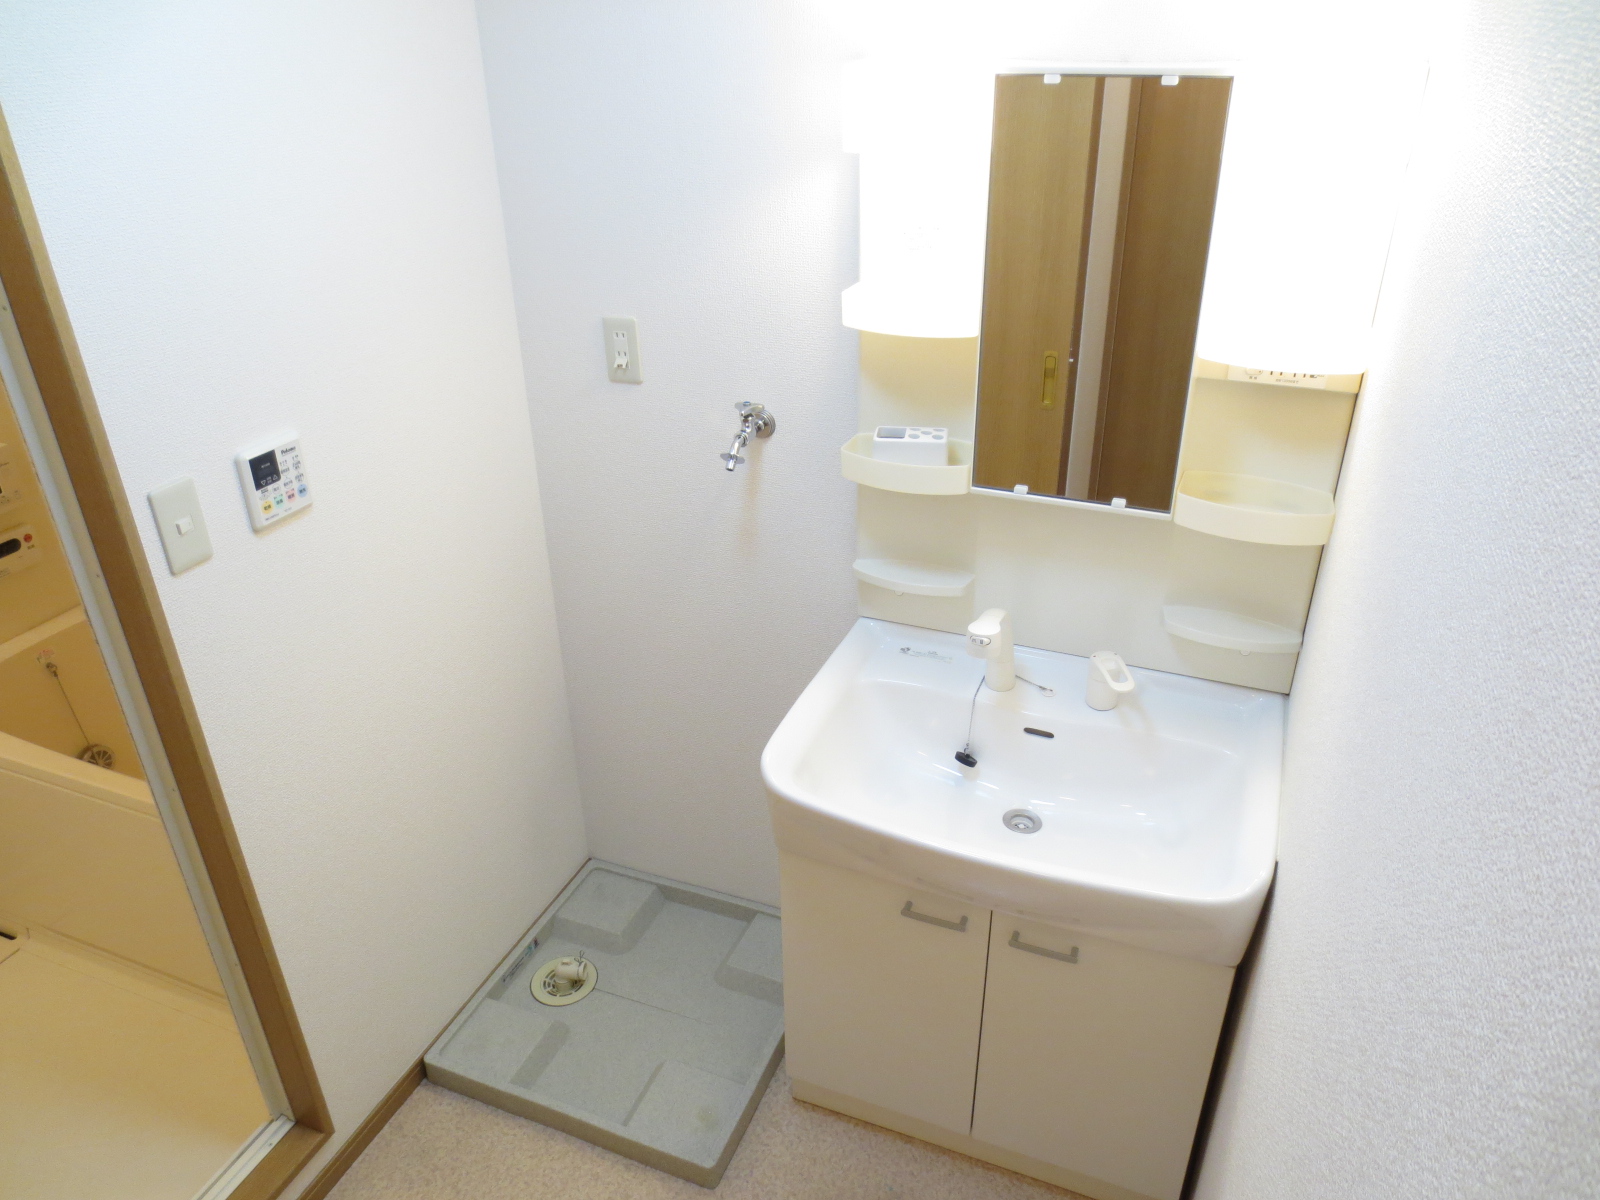 Washroom. Makeup is a wash basin in the shower type! Laundry Area is also the room!